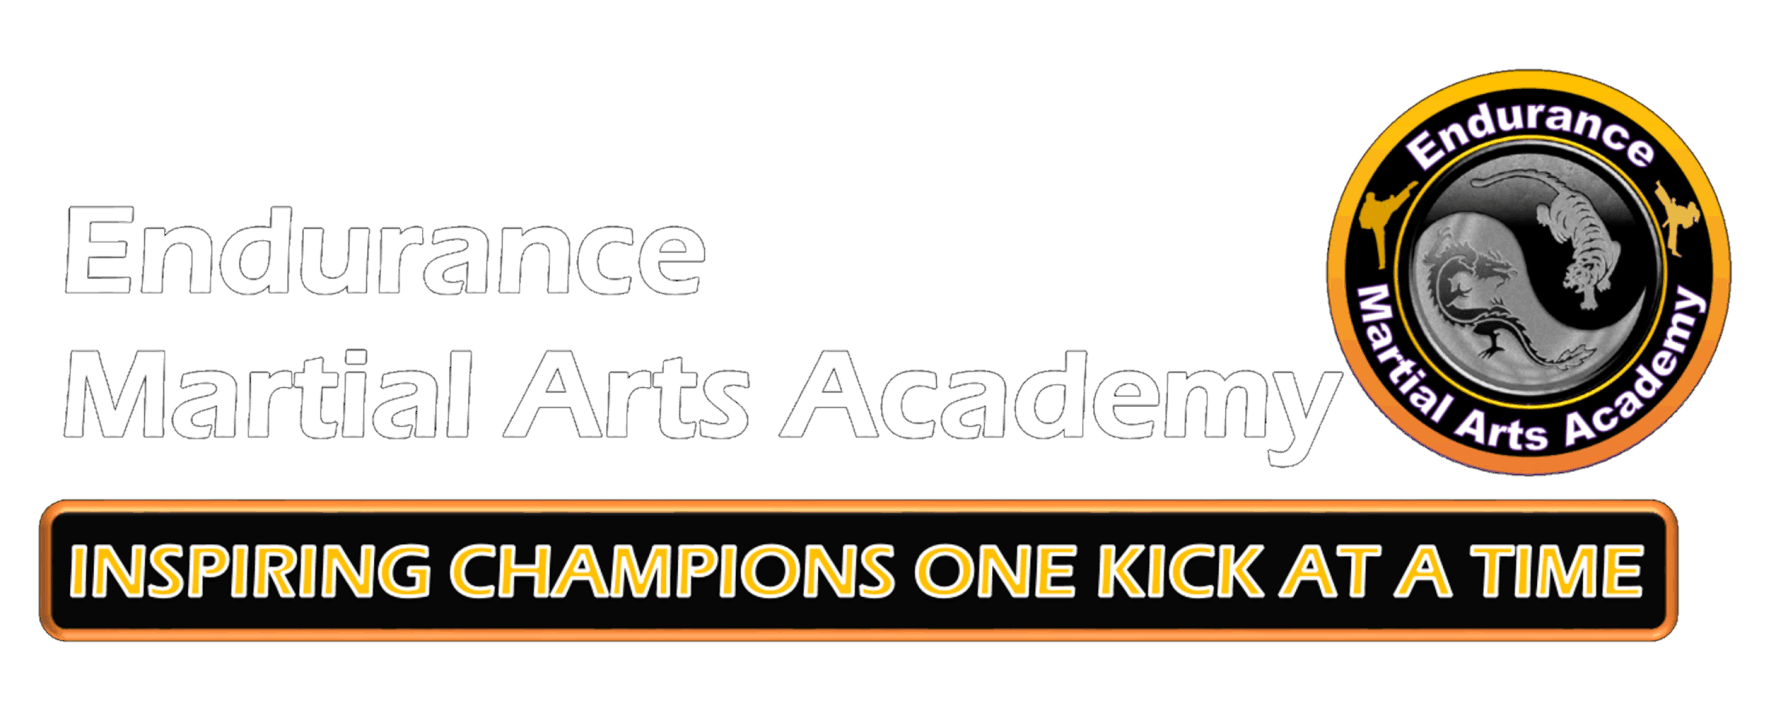 Full-time Martial Arts Academy teaching kickboxing, karate & thai boxing to families in the Northampton area